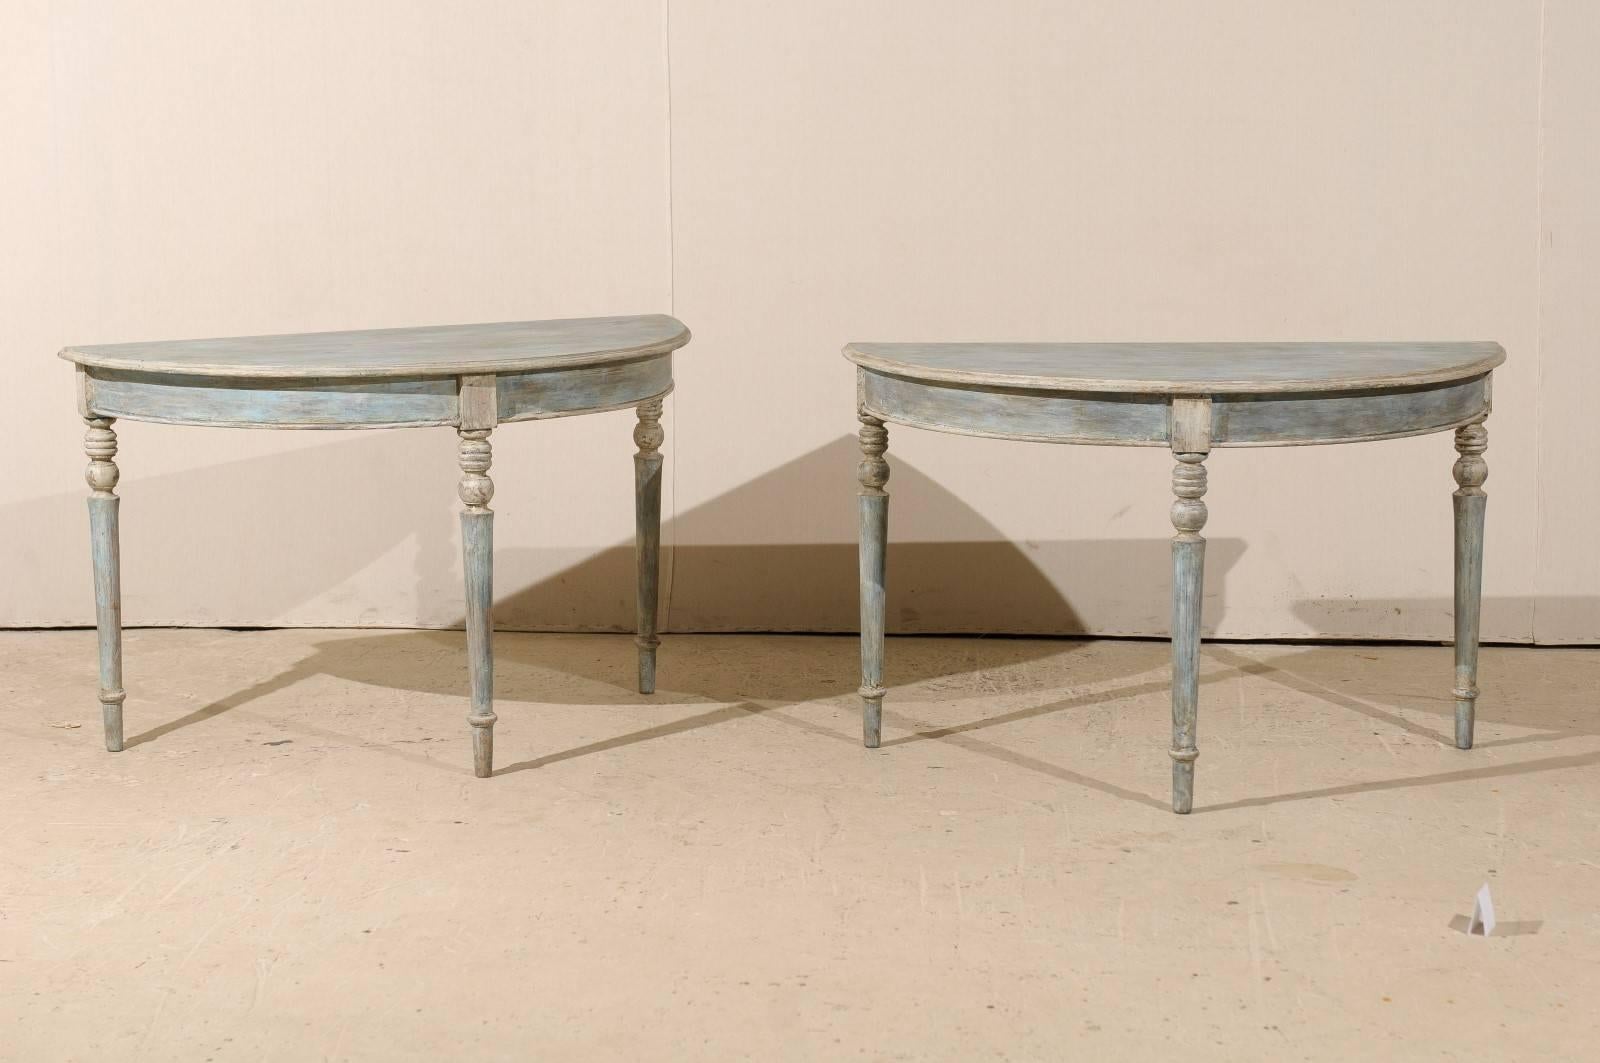 A pair of Swedish 19th century wood demilune tables. This pair of painted wood demilune tables features semi-circular tops over rounded aprons. The tables are raised on three turned and tapered legs. The primary color of these tables is an aqua blue